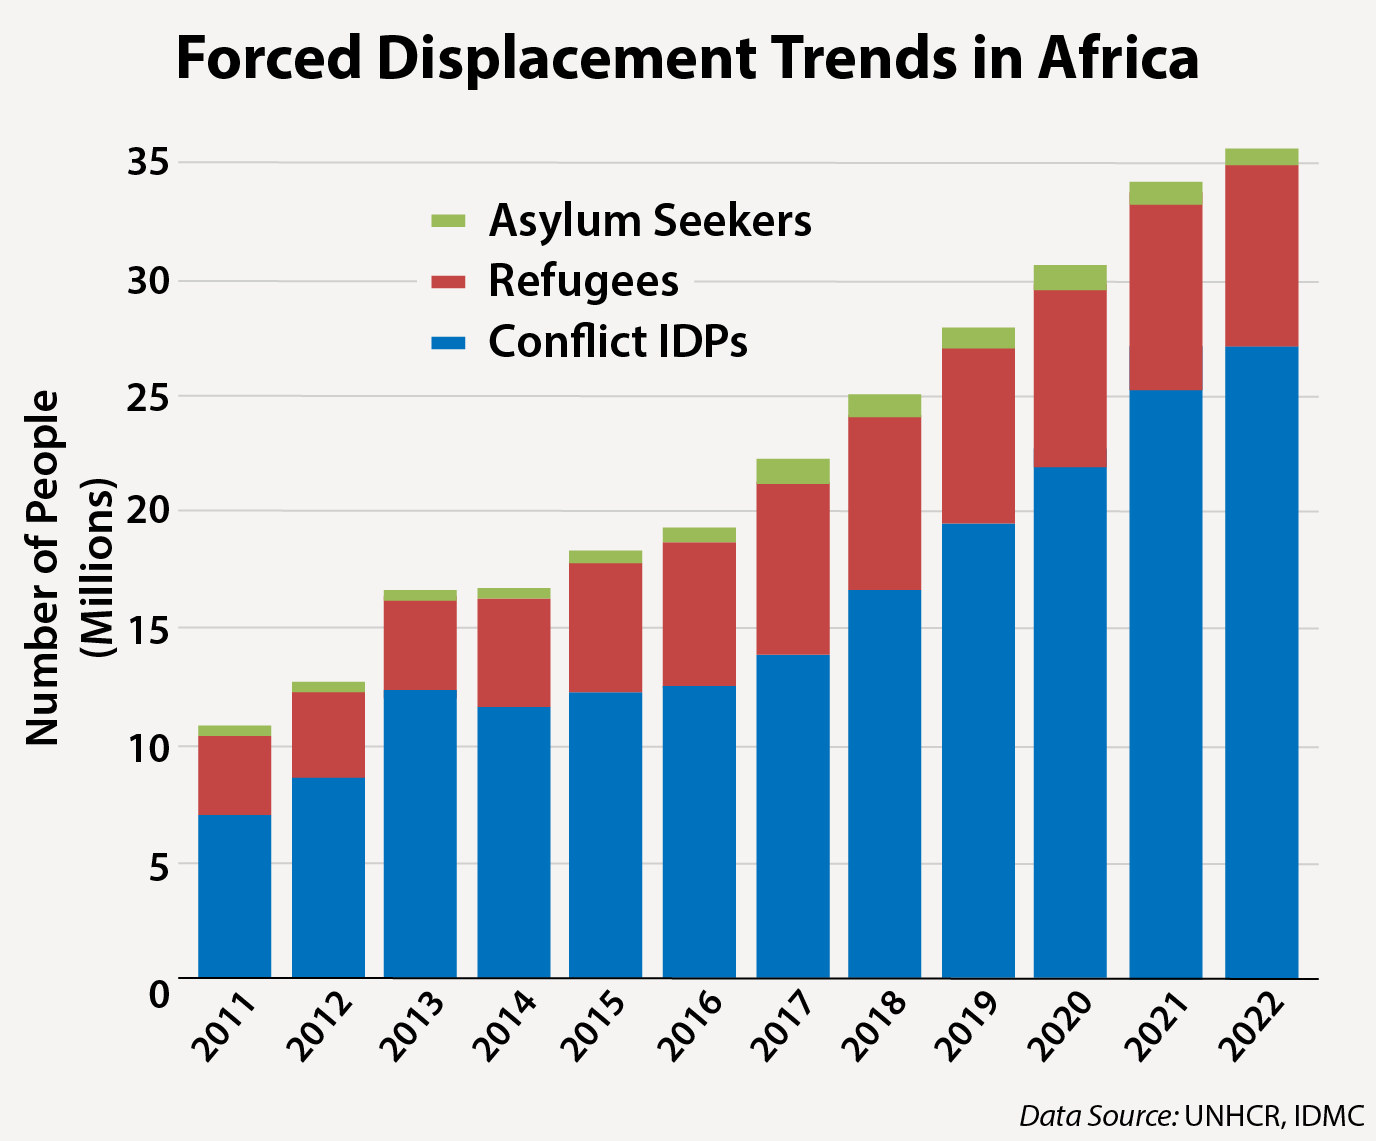 Forced Displacement Trends in Africa